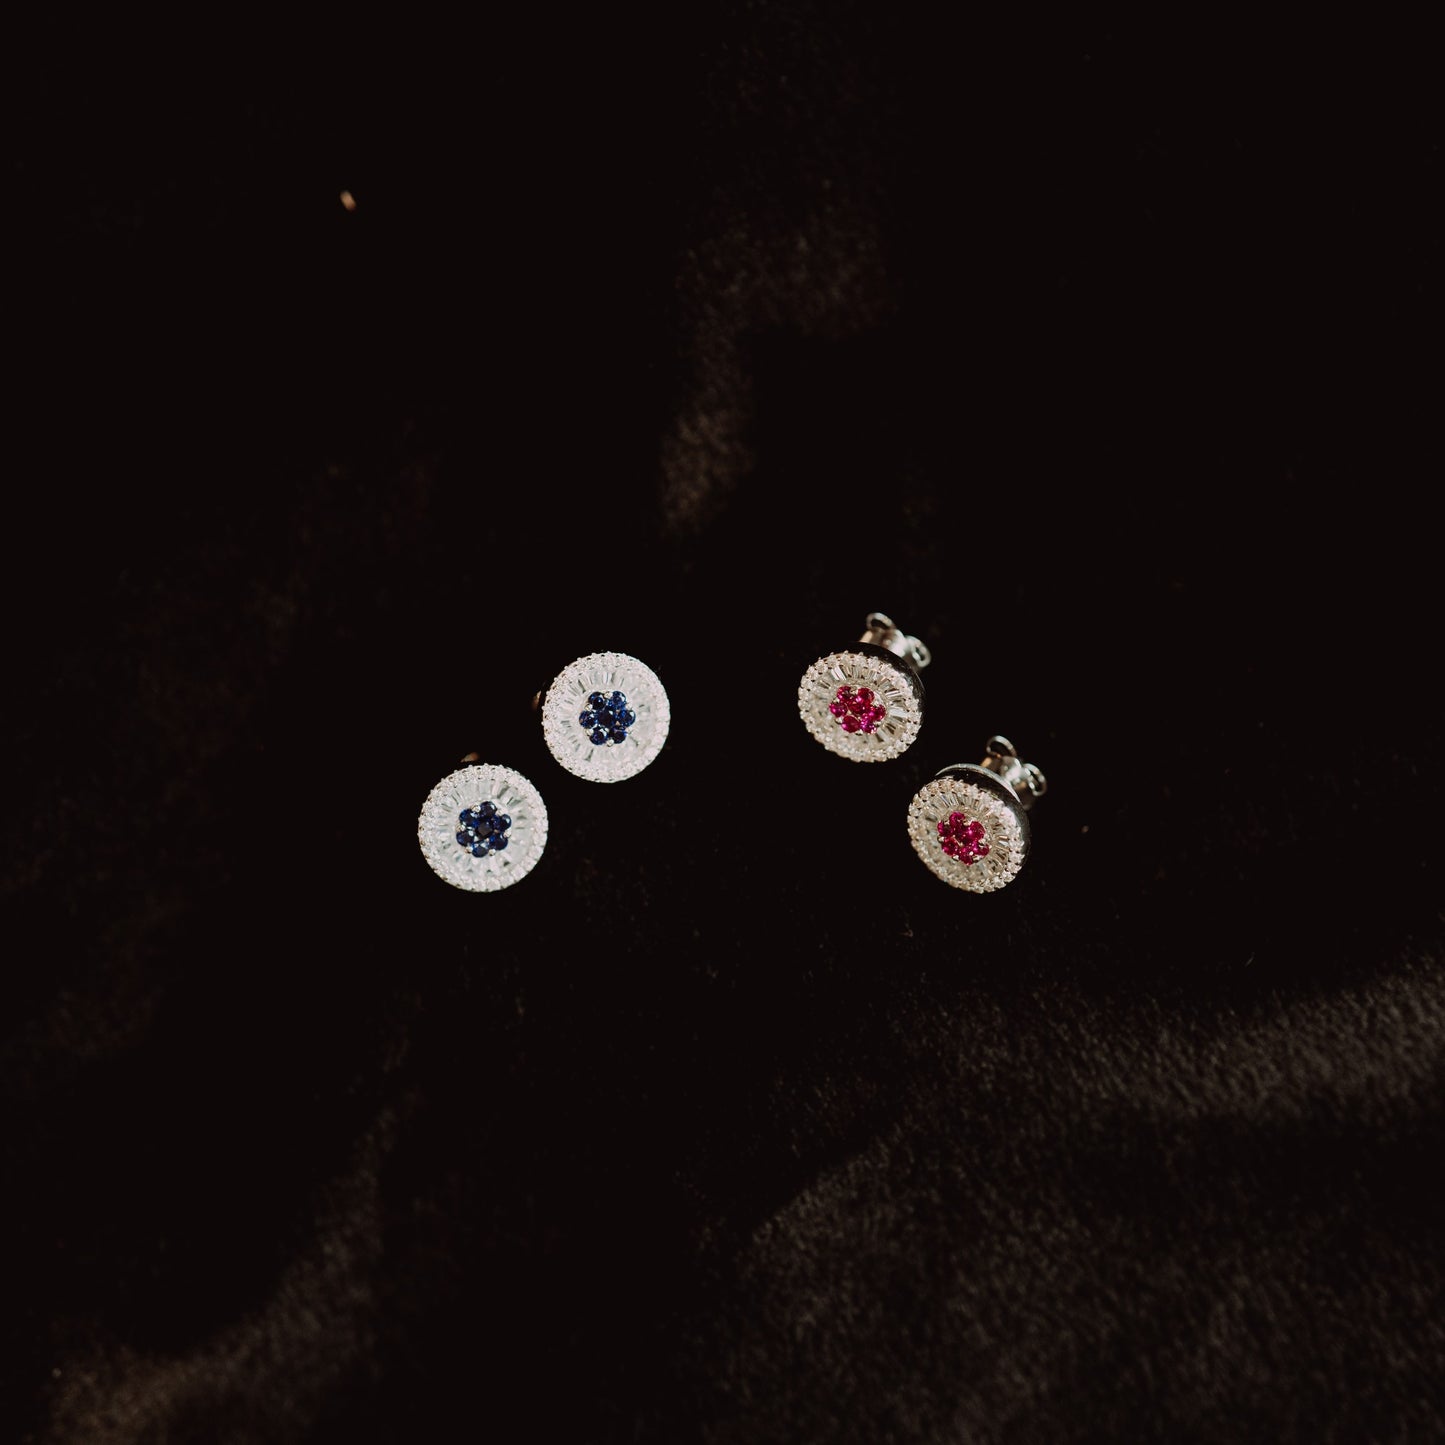 Round Silver Symmetry Studs with Colored Stones in Middle